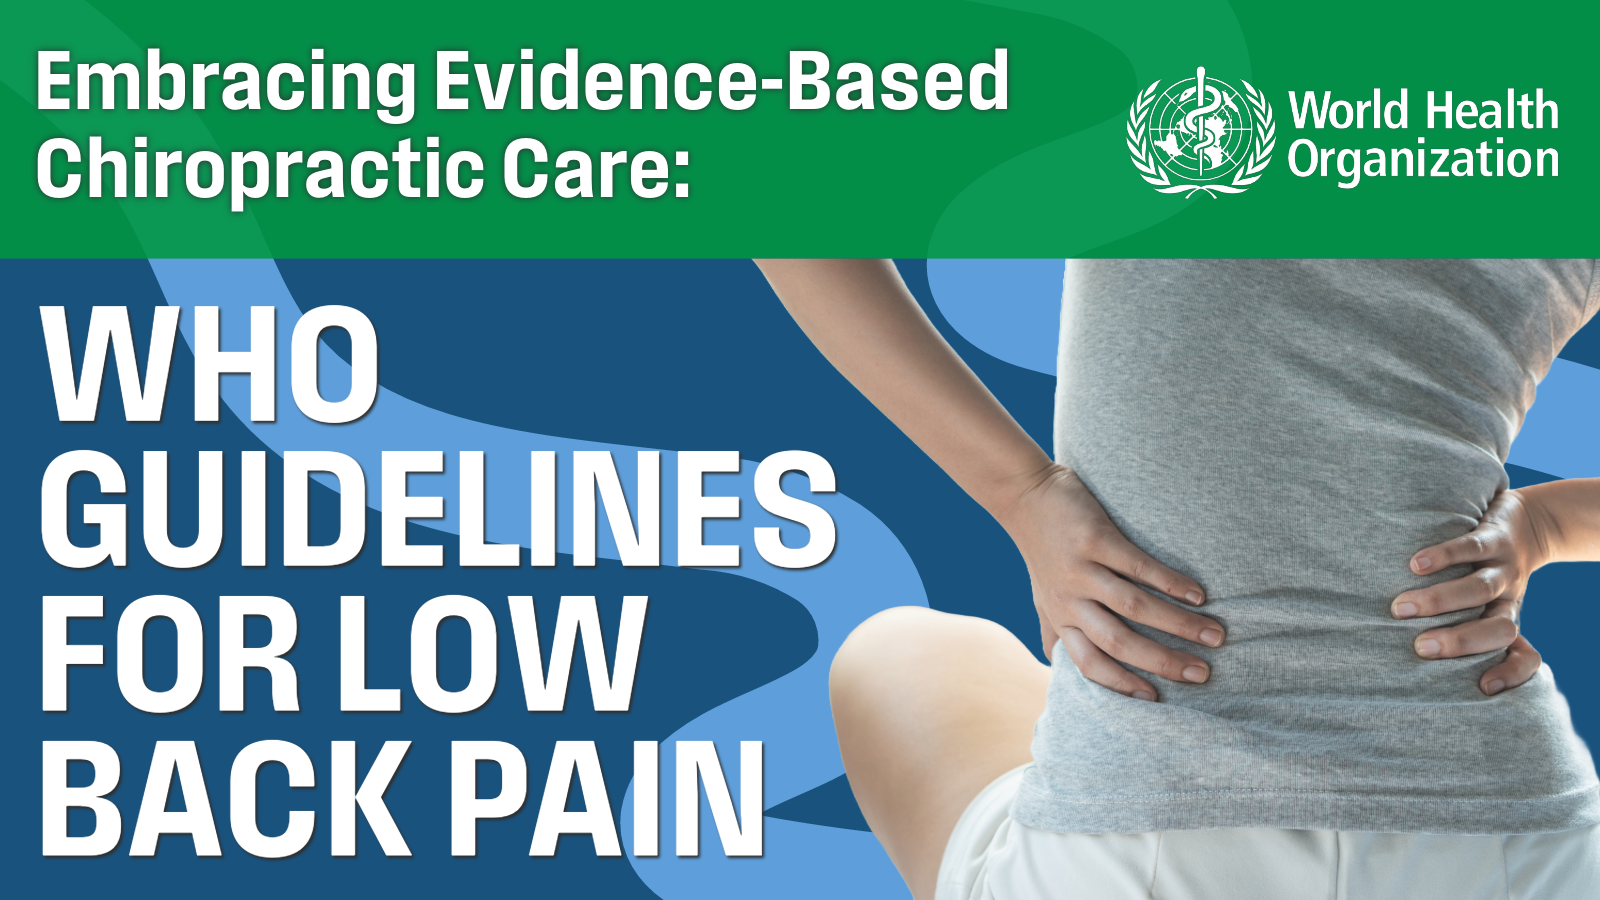 WHO Guidelines for Low Back Pain